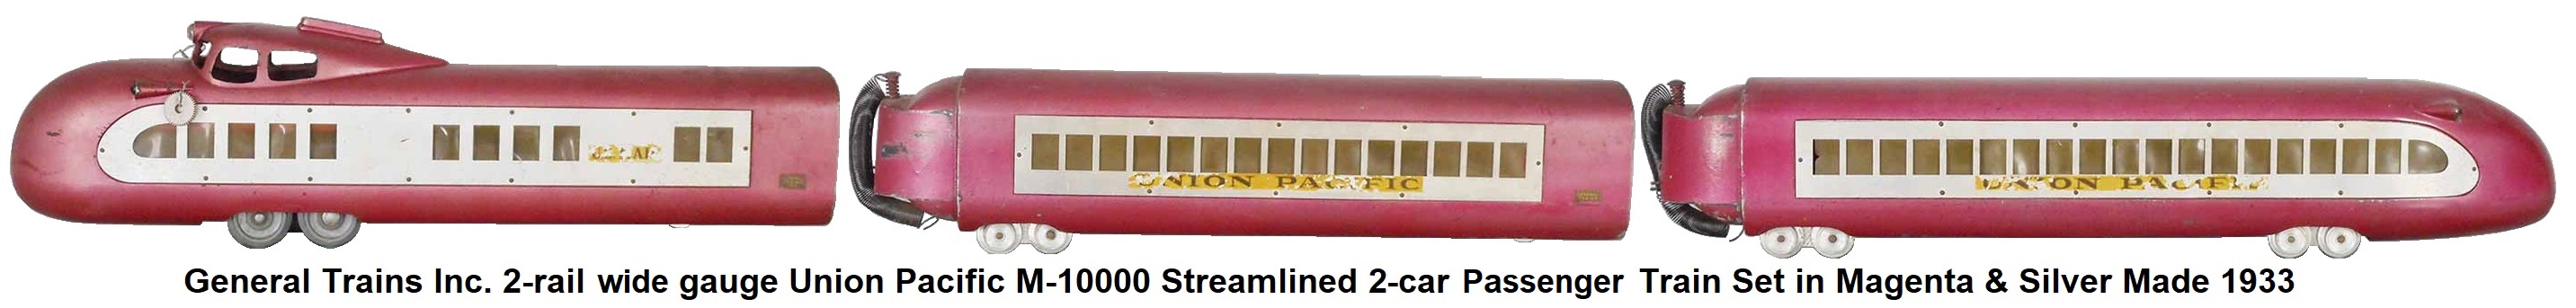 General Trains 2-rail Standard gauge Union Pacific M-10000 streamlined 3-car train Set in magenta & silver made 1933